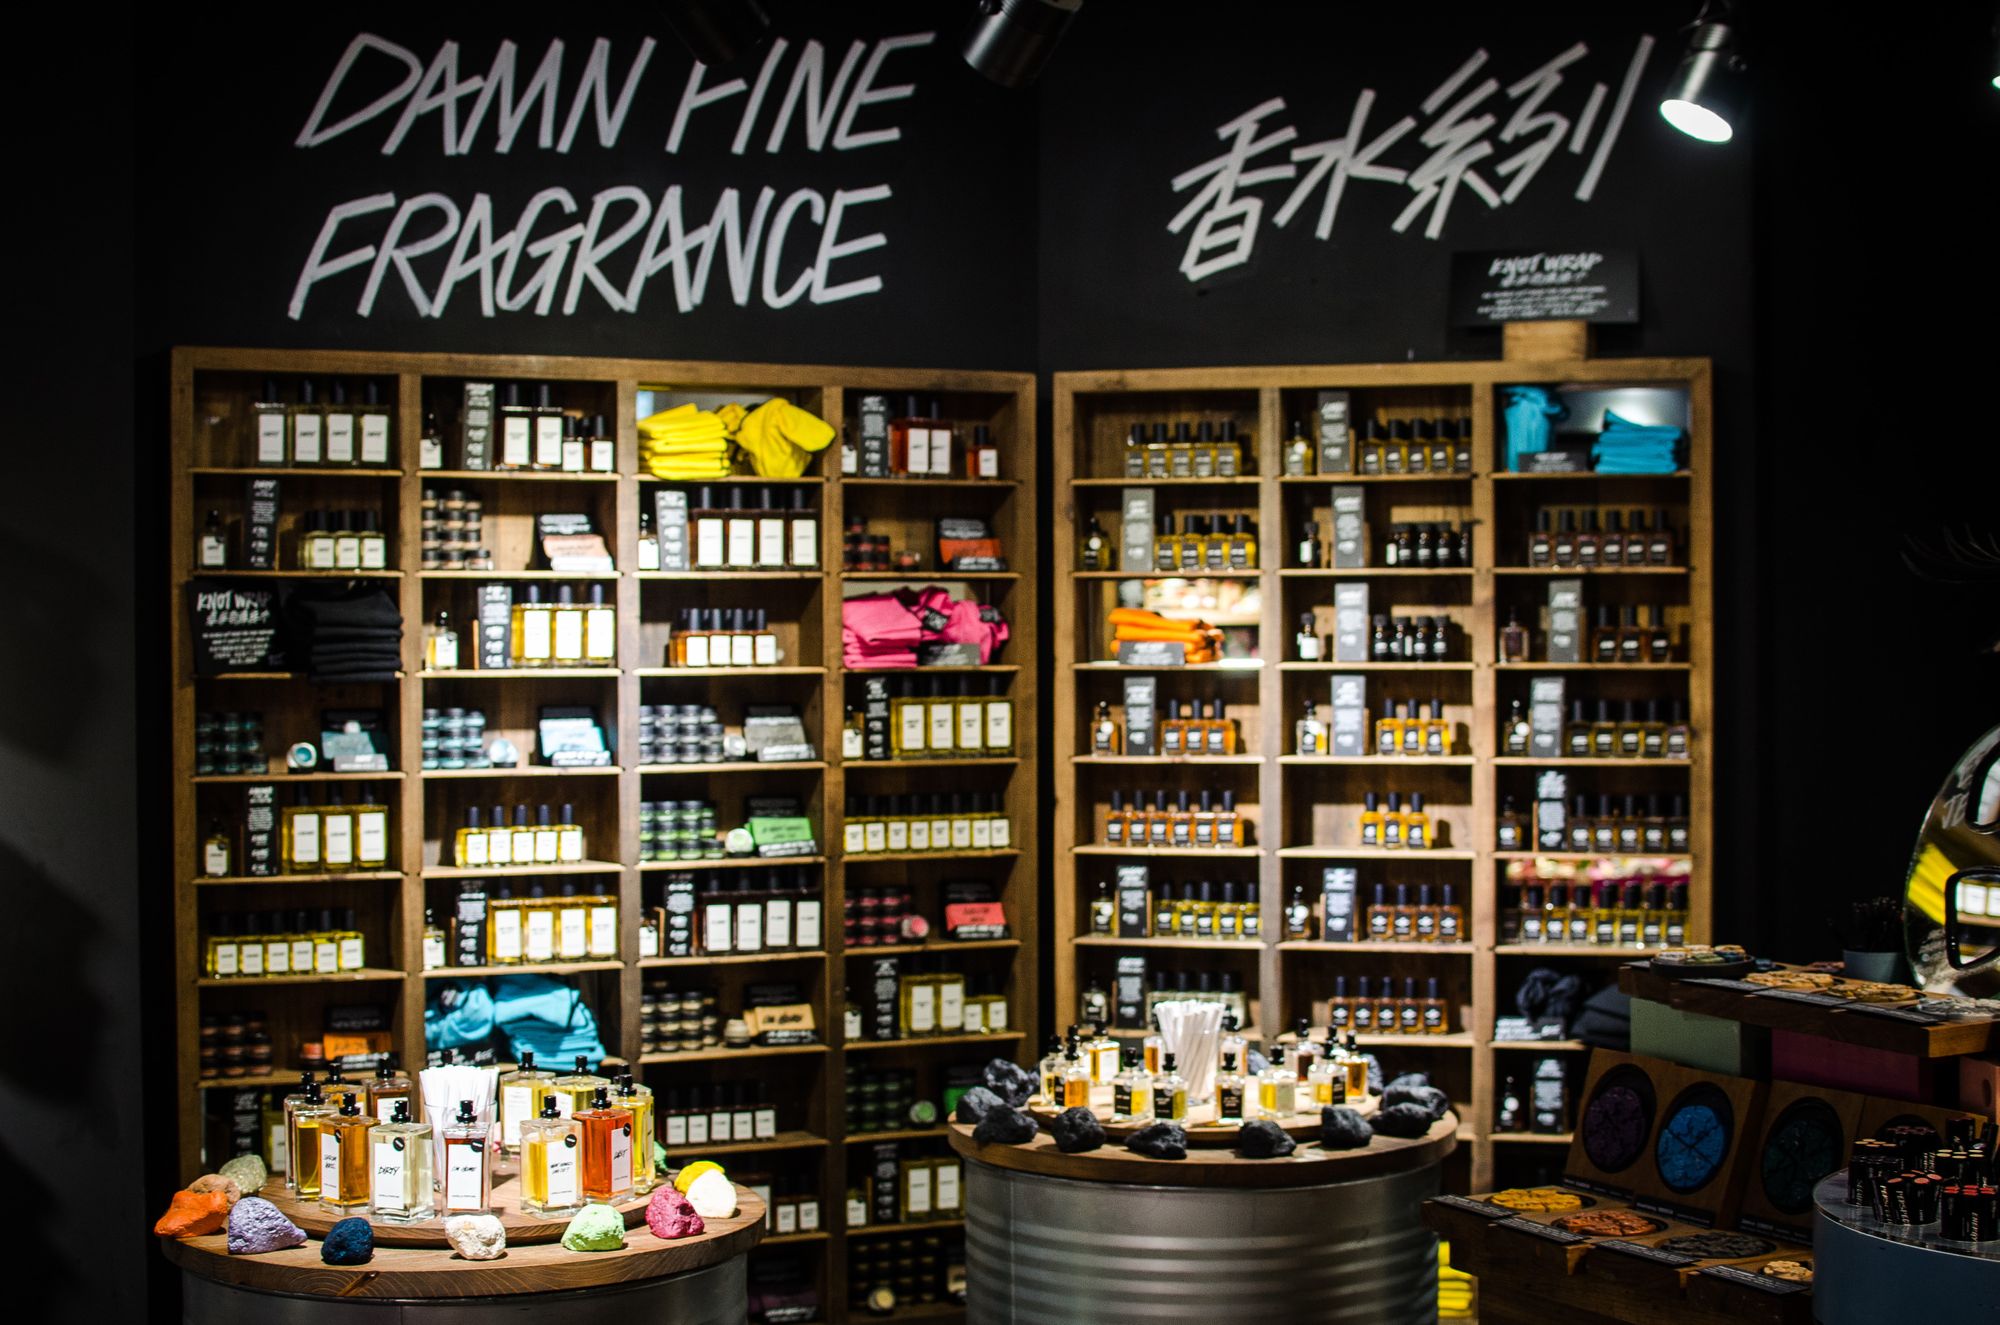 Lush and the war on plastic